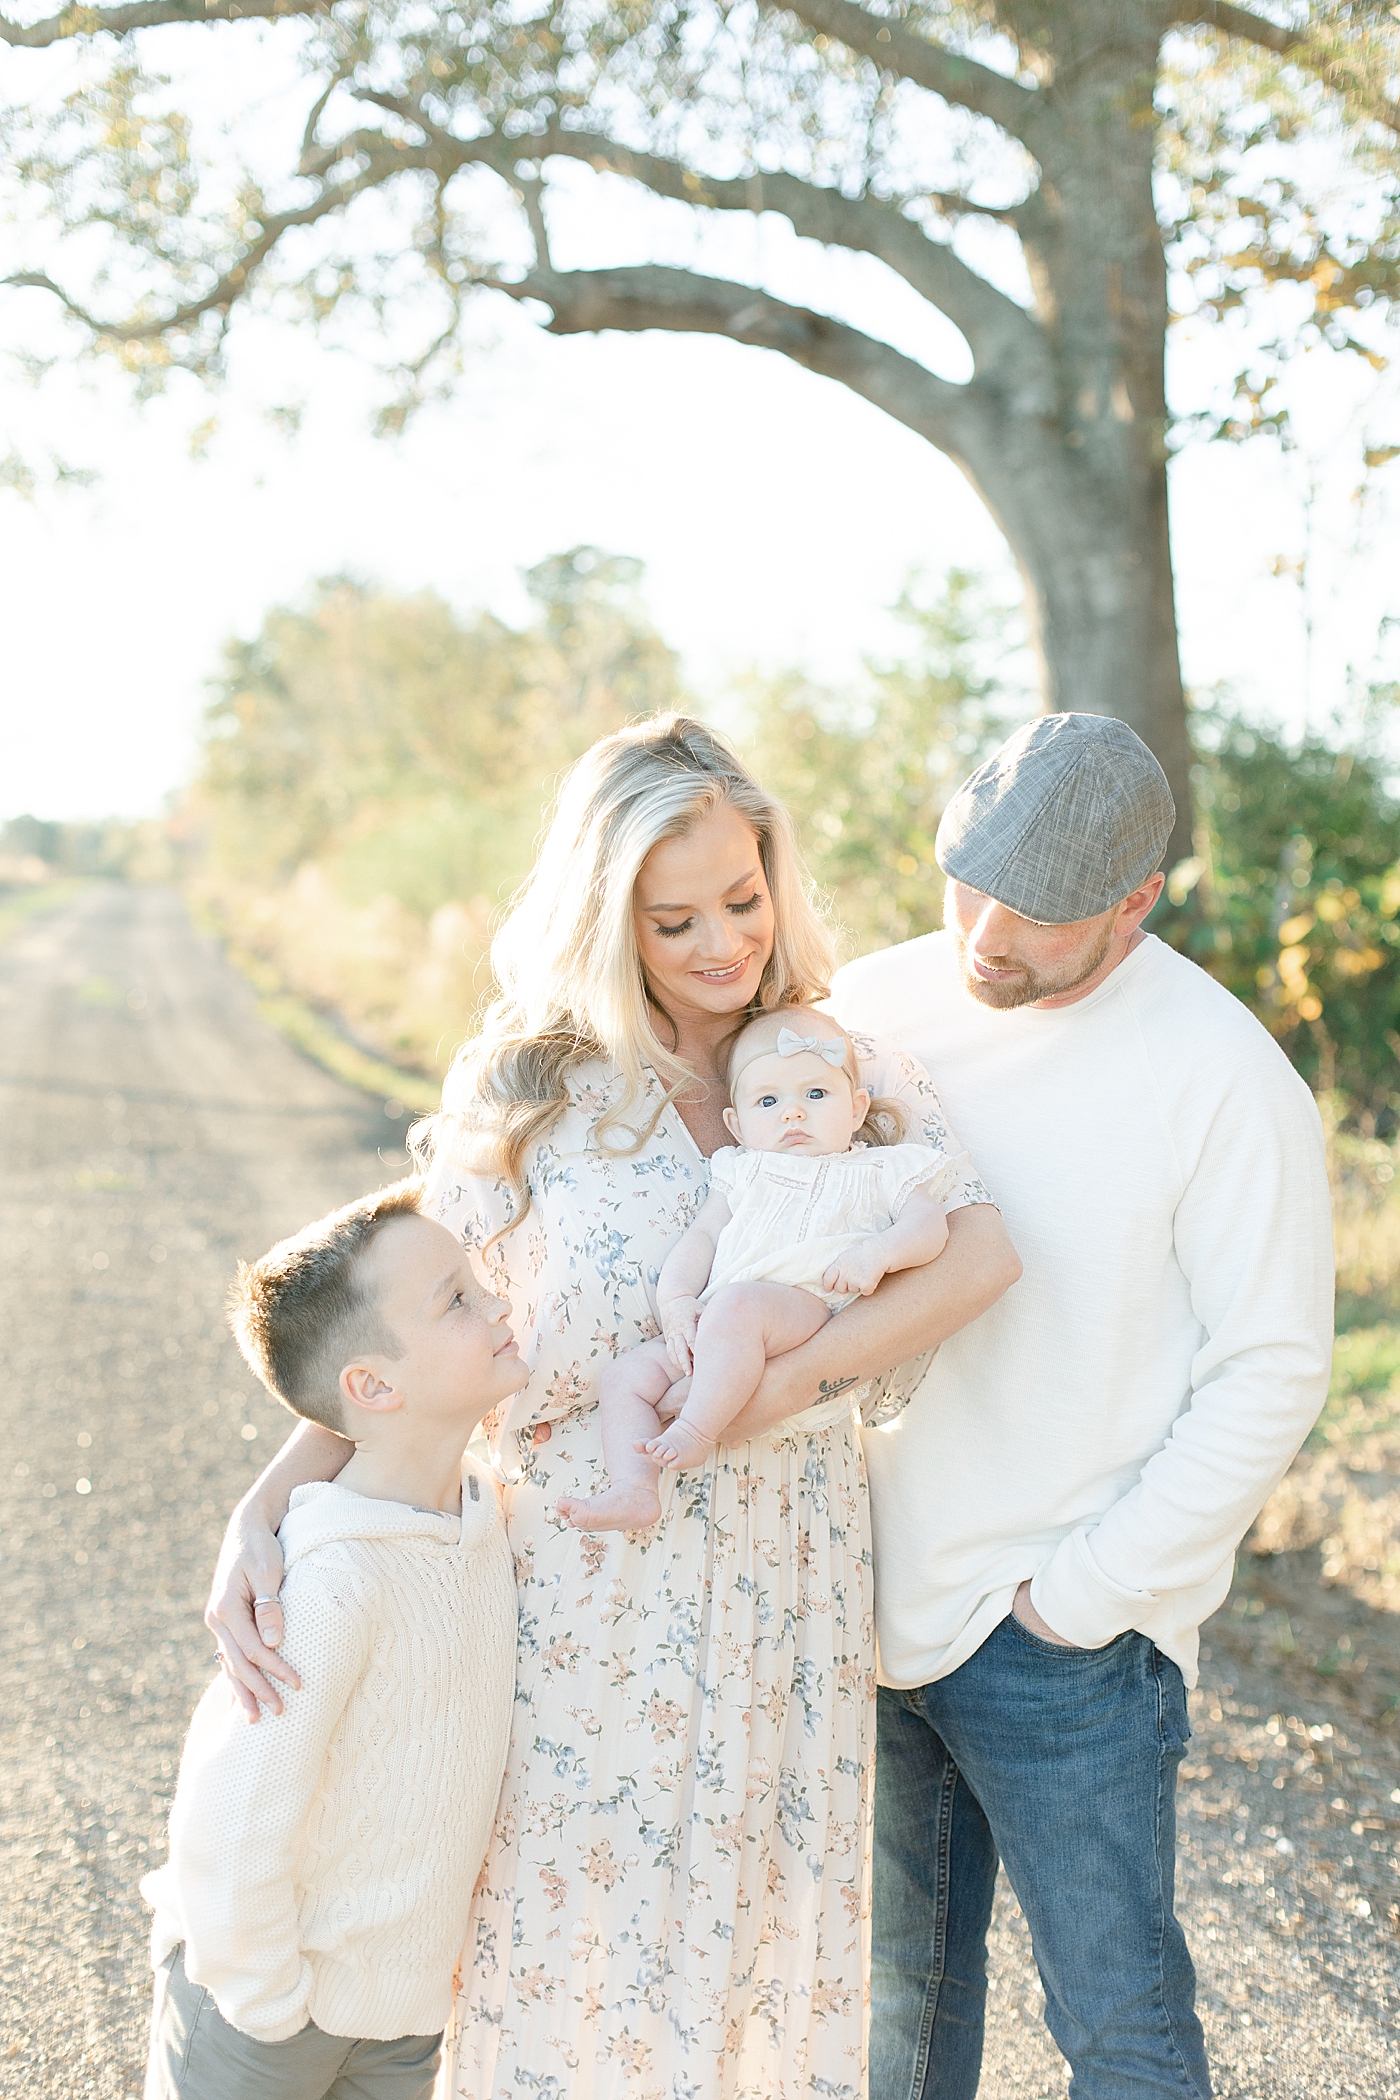 Family snuggling while walking on a dirt path | Photo by Gulfport baby photographer Little Sunshine Photography